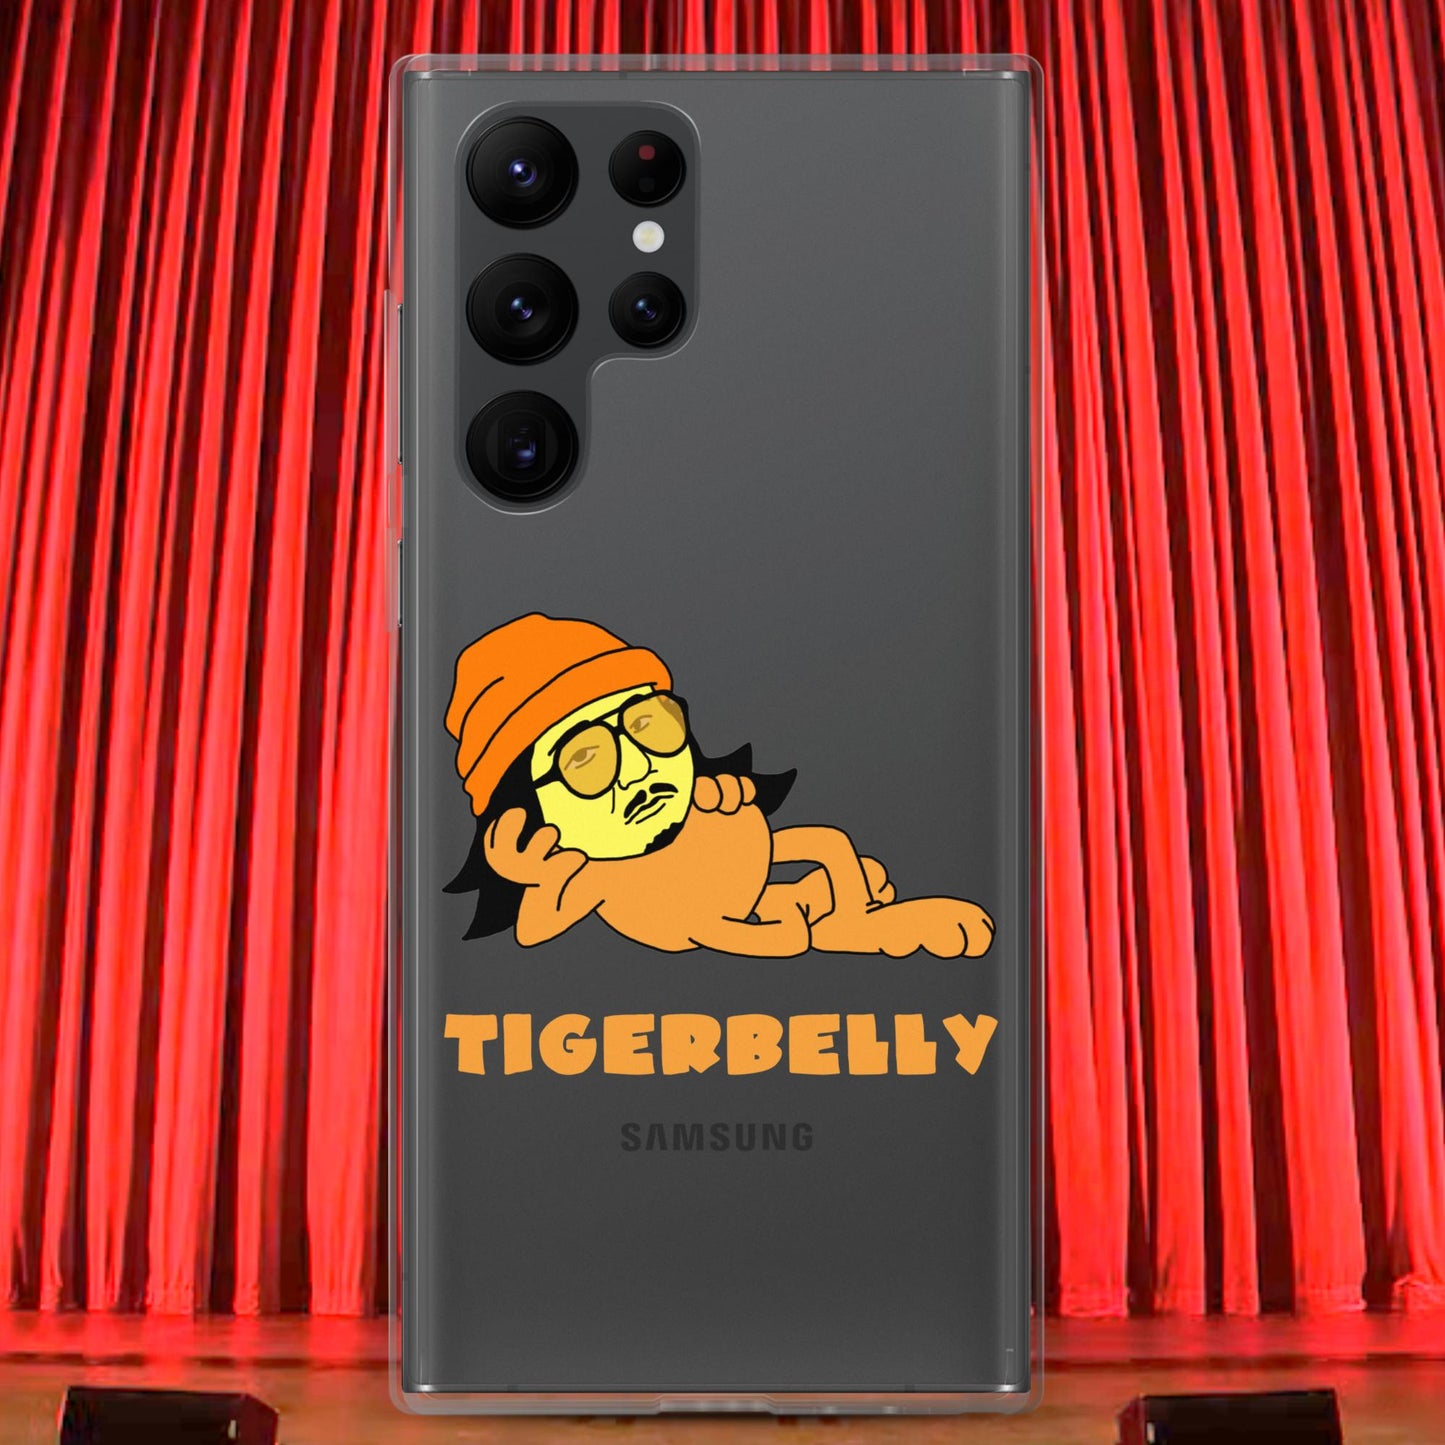 Bobby Lee Tigerbelly, Bobby Lee Merch, Tigerbelly Merch, Bobby Lee Gift, Funny Tigerbelly Gift, Tigerbelly Podcast, TigerBelly Clear Case for Samsung Next Cult Brand Bobby Lee, Podcasts, Stand-up Comedy, TigerBelly